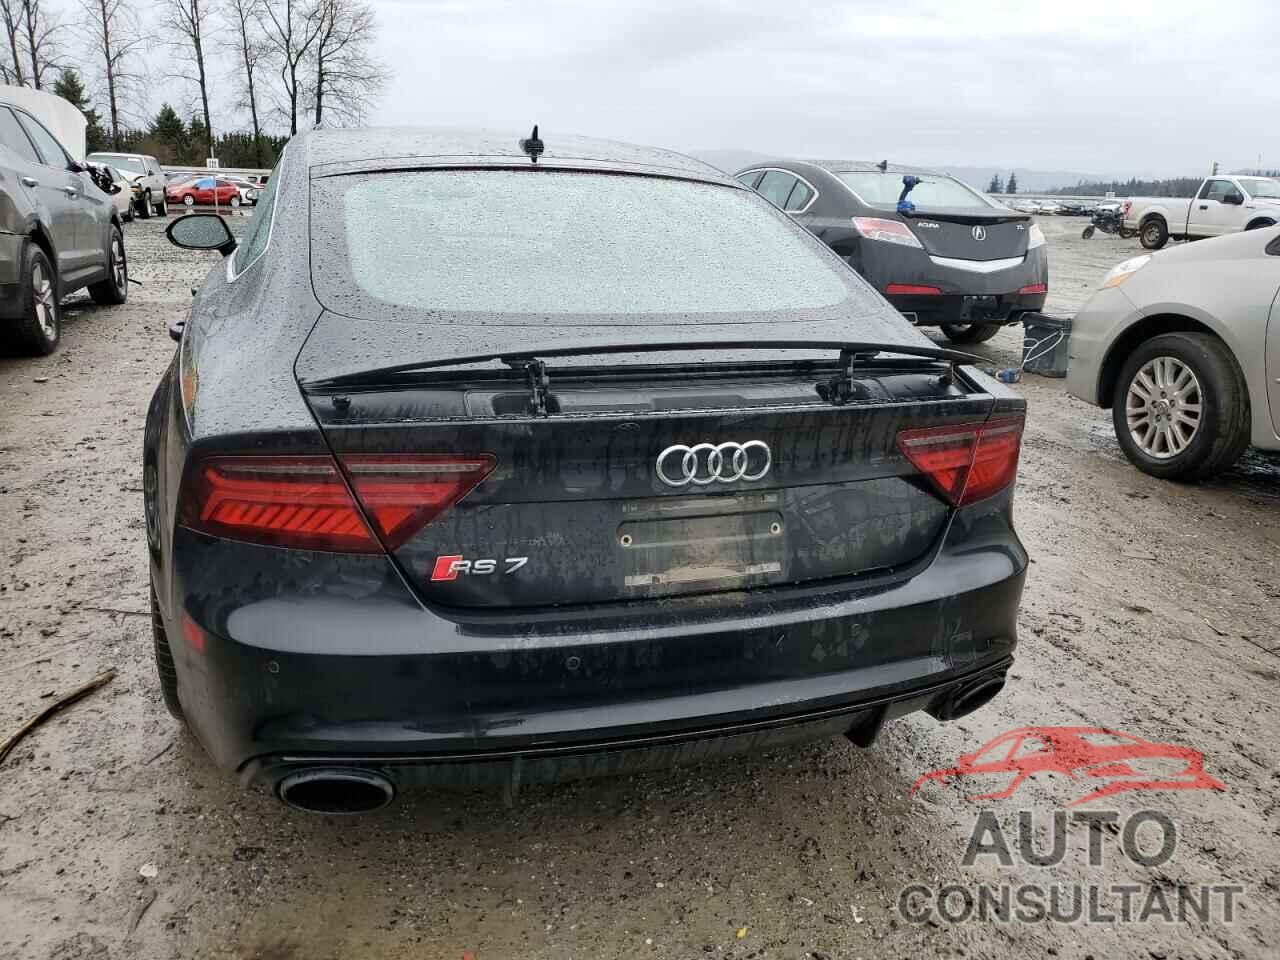 AUDI S7/RS7 2016 - WUAW2AFC9GN901234